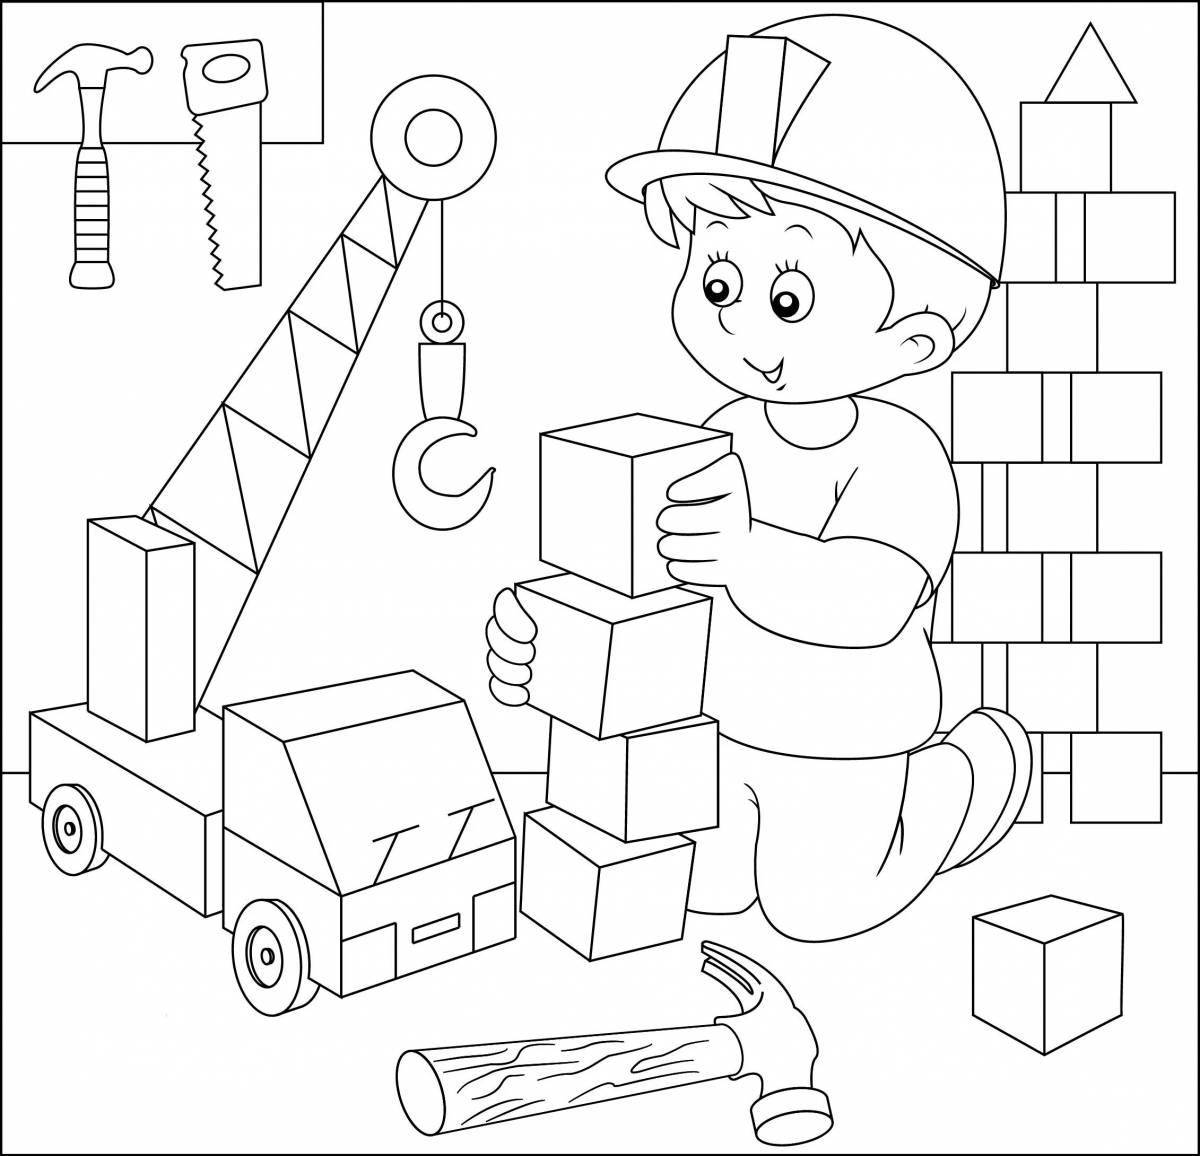 Occupational safety for children #15